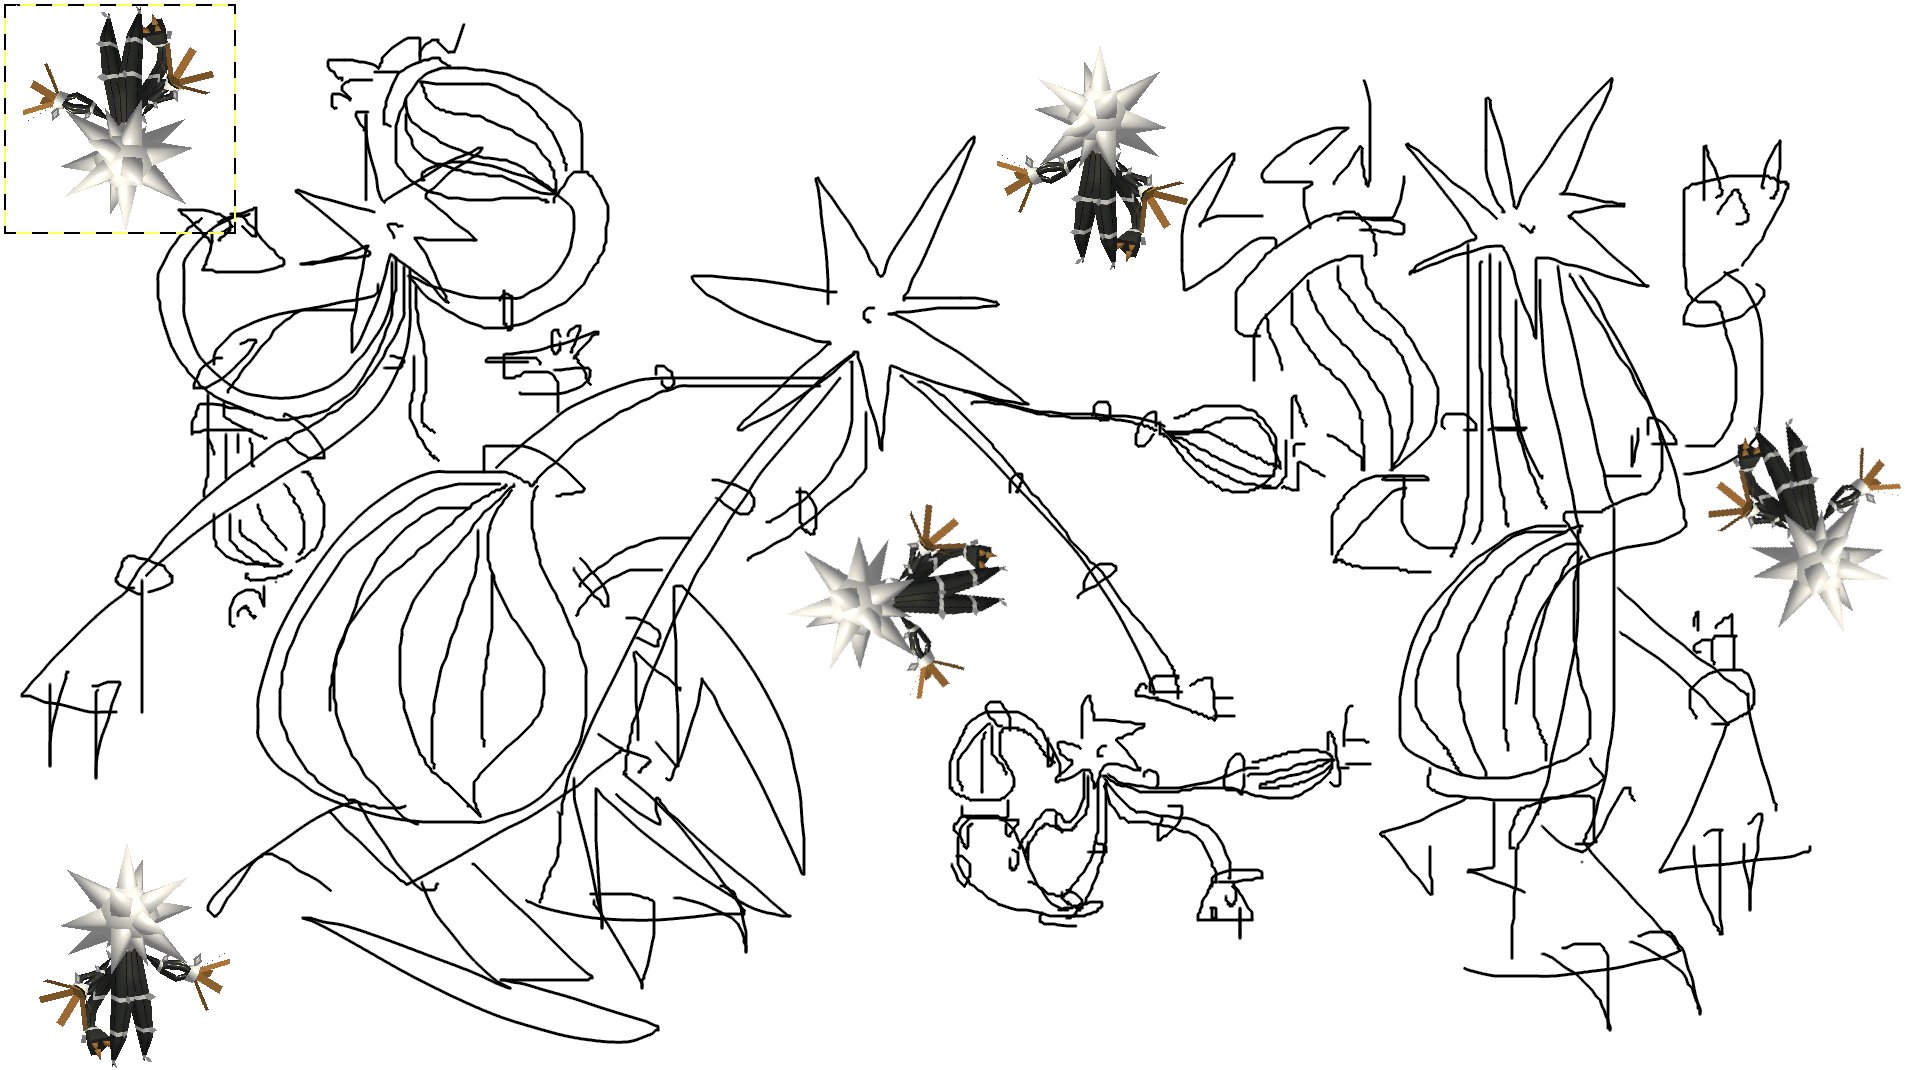 multiple rough doodles of xurkitree